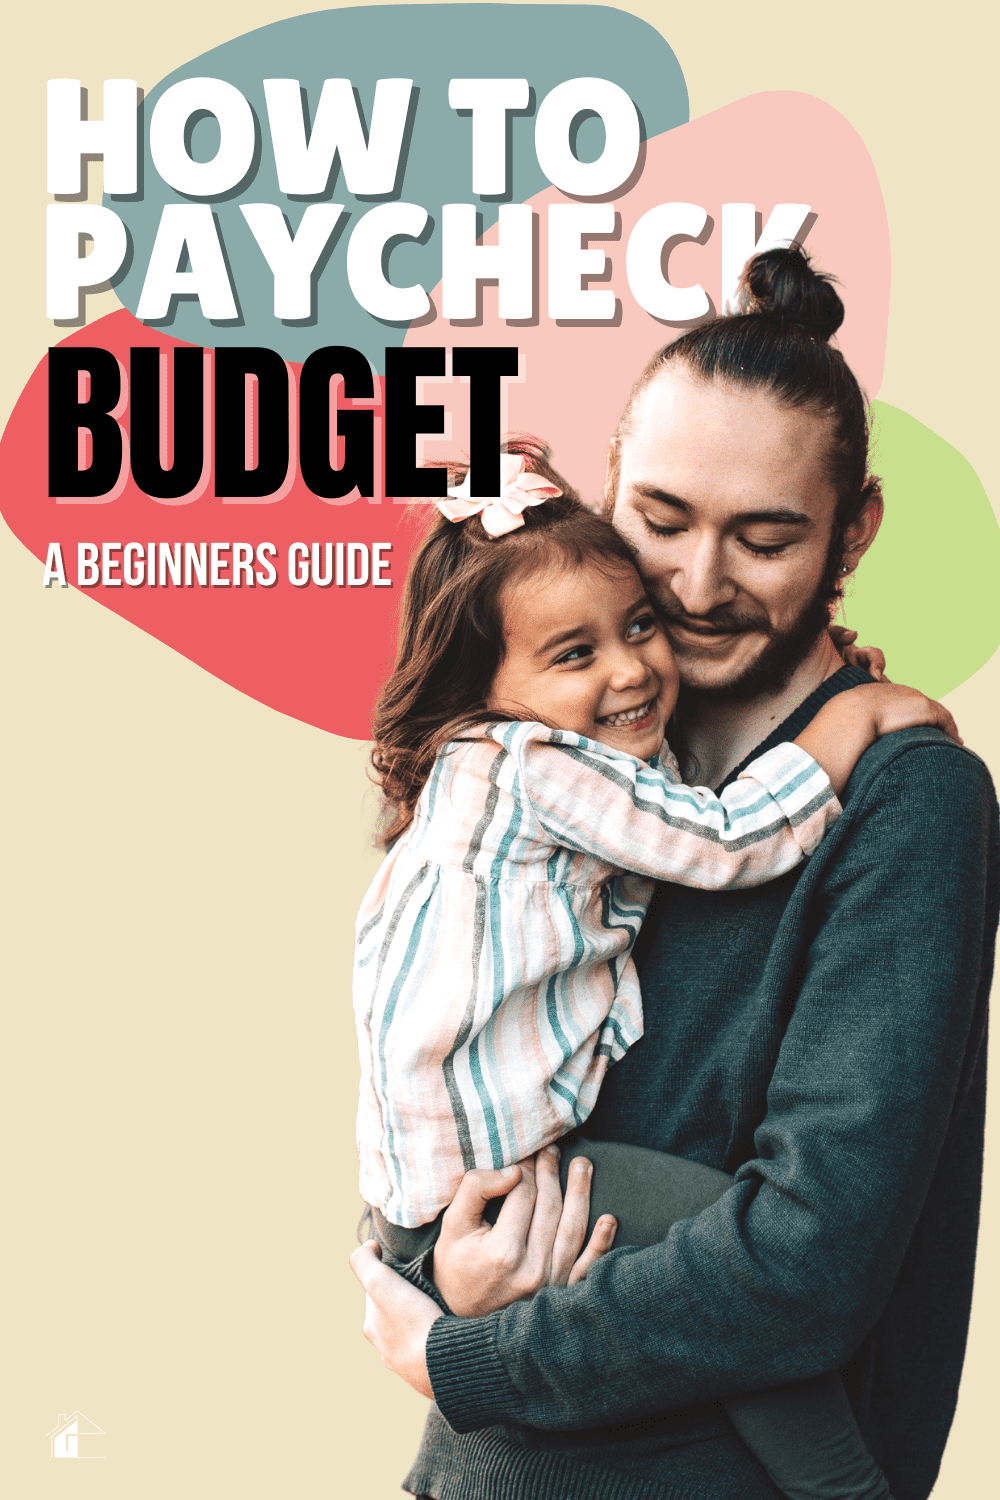 We’ll walk you through steps to paycheck budgeting to help you make the most of your income and maximize your financial success. via @mystayathome